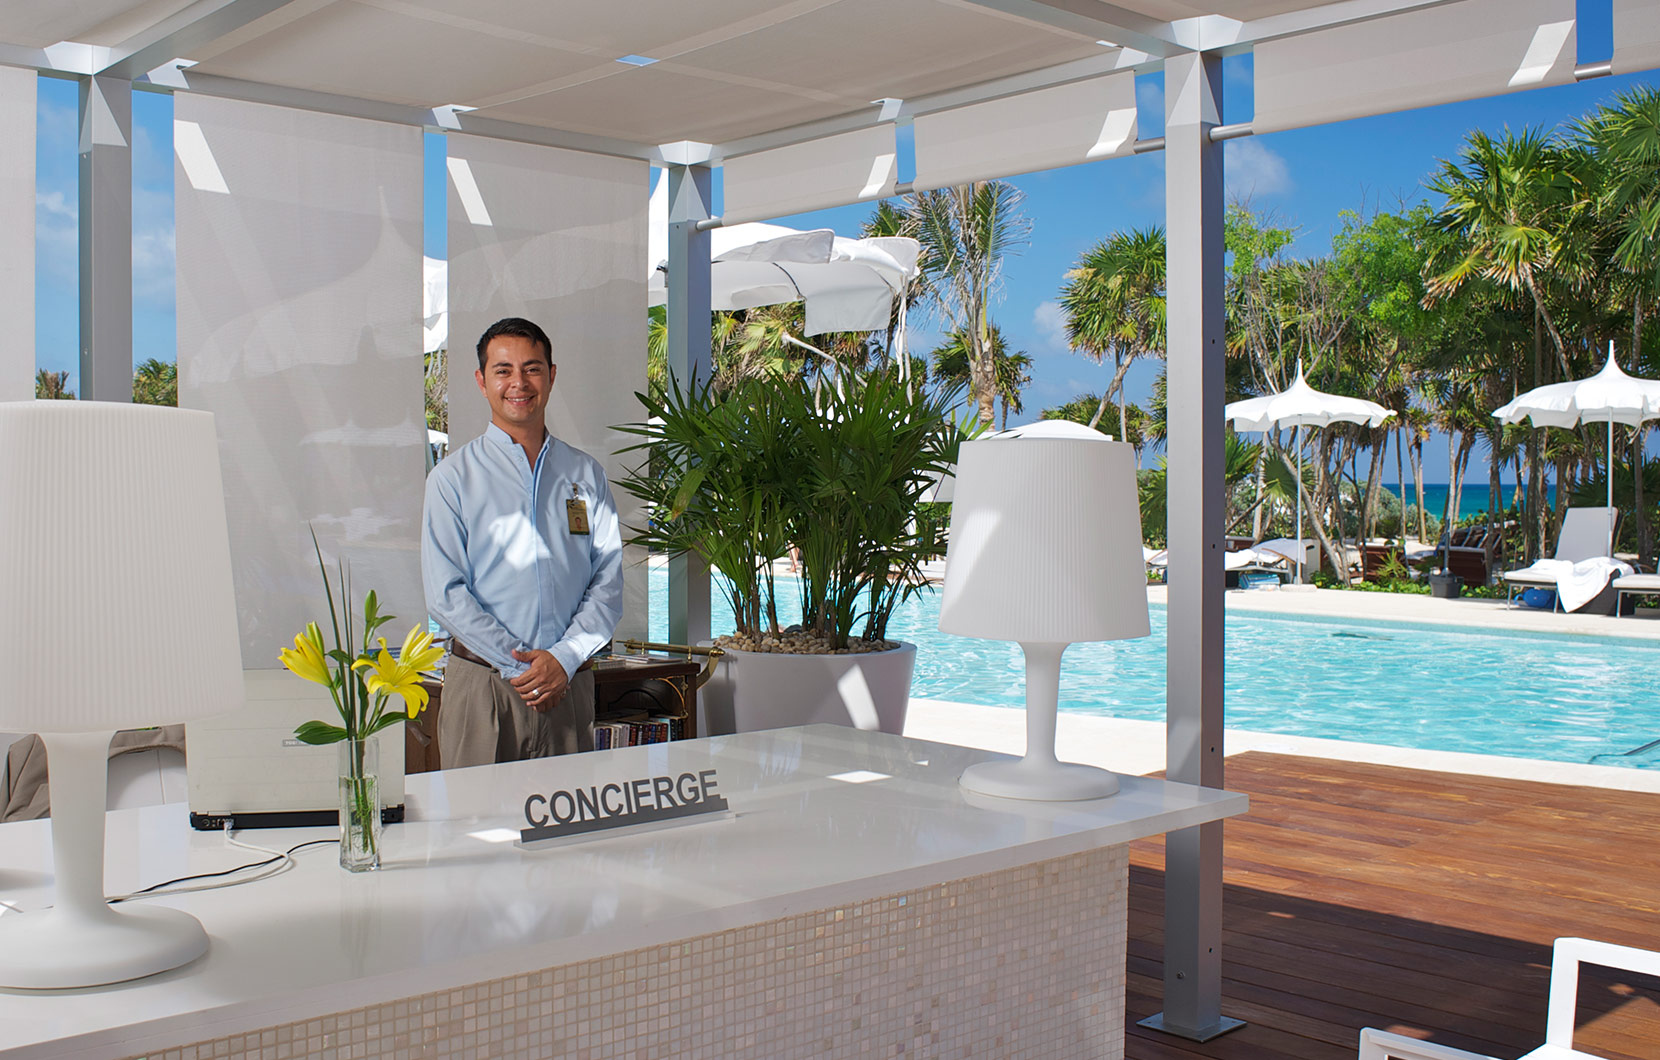 The Pool Concierge at the Grand Luxxe pool and sundeck.